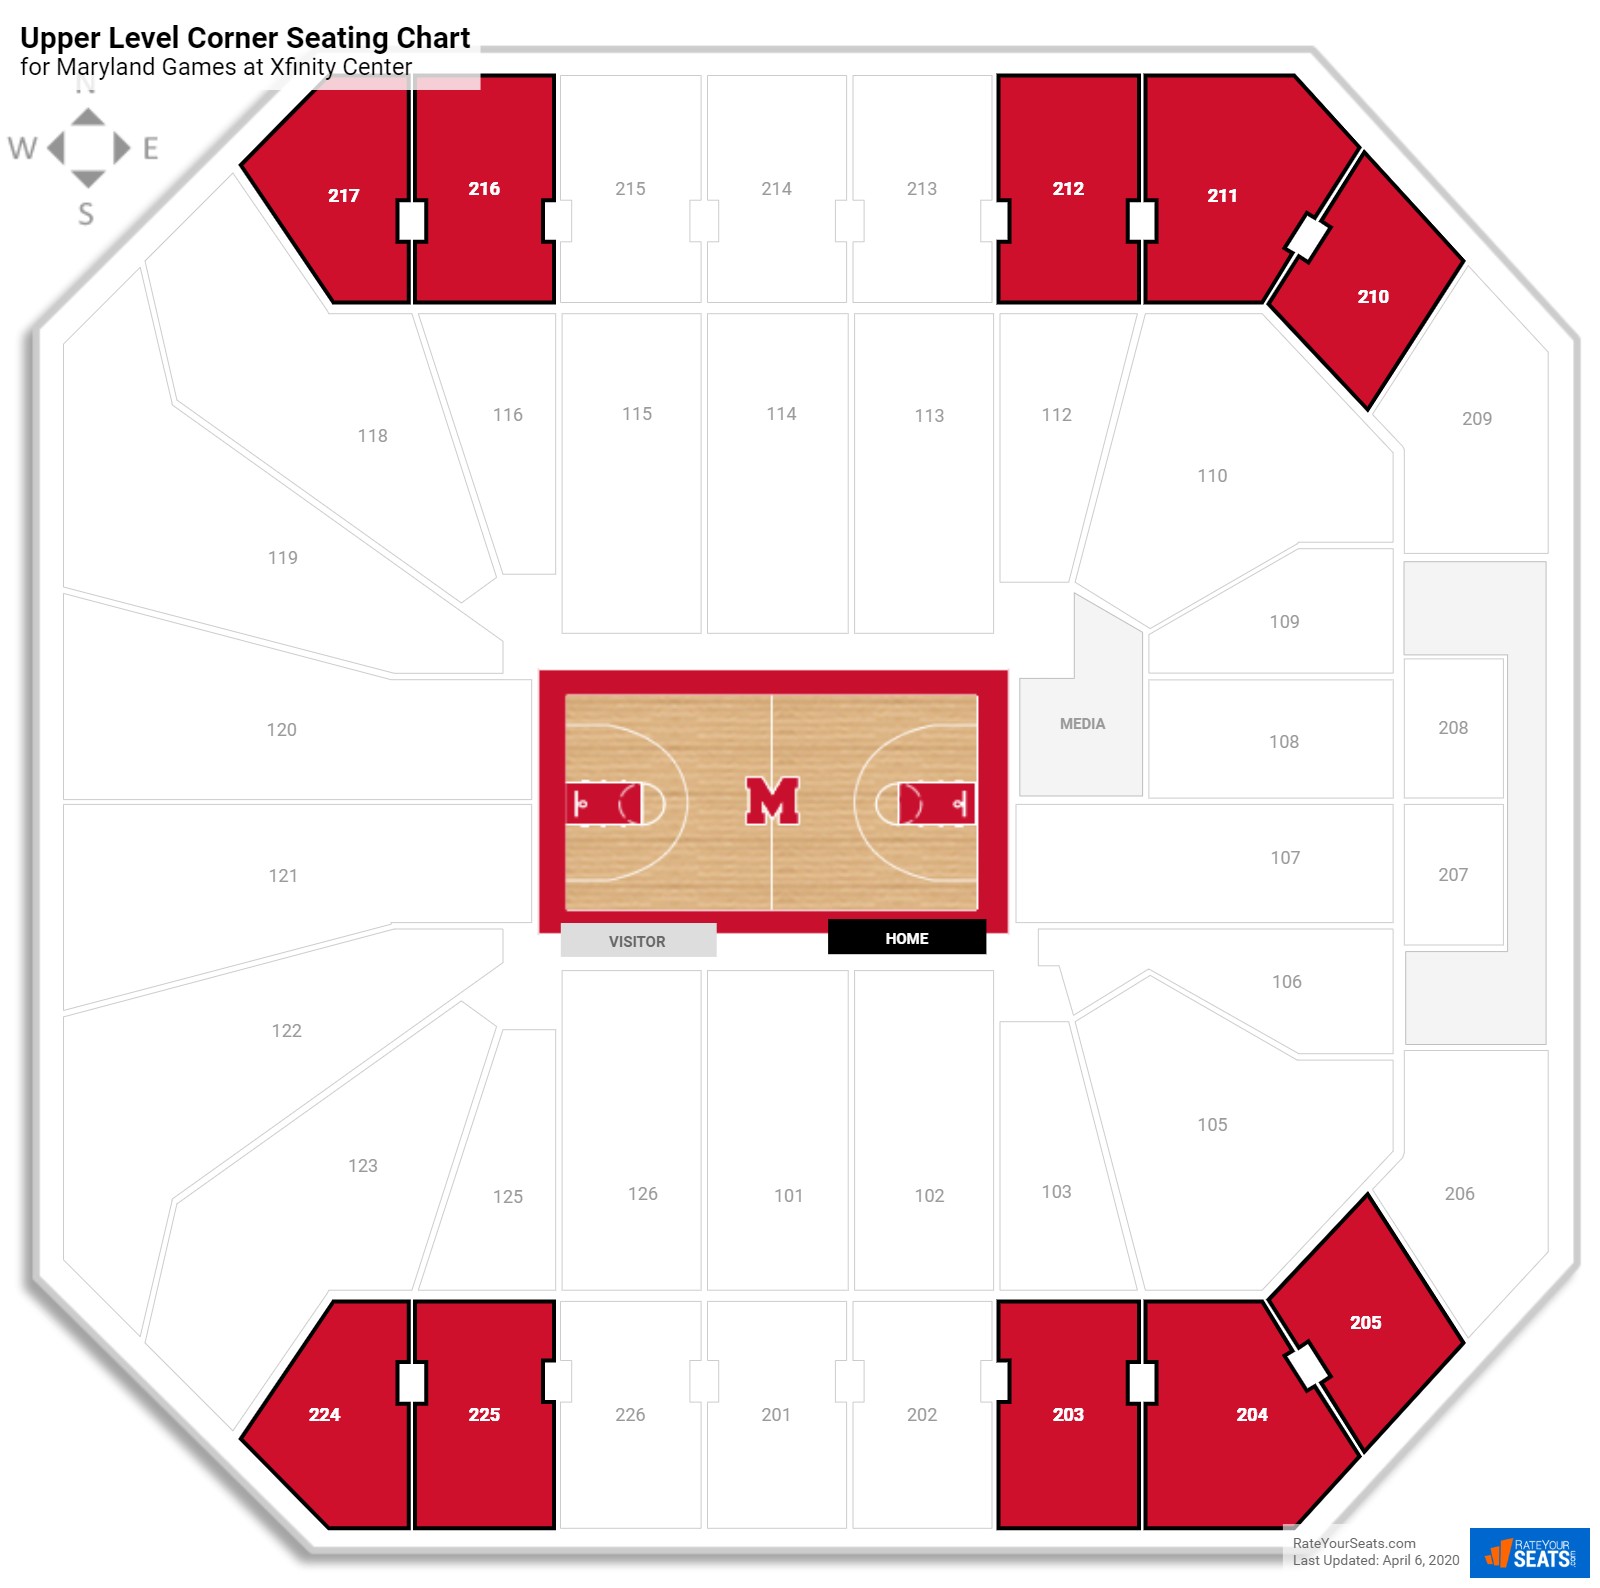 Comcast Center Maryland Seating Chart